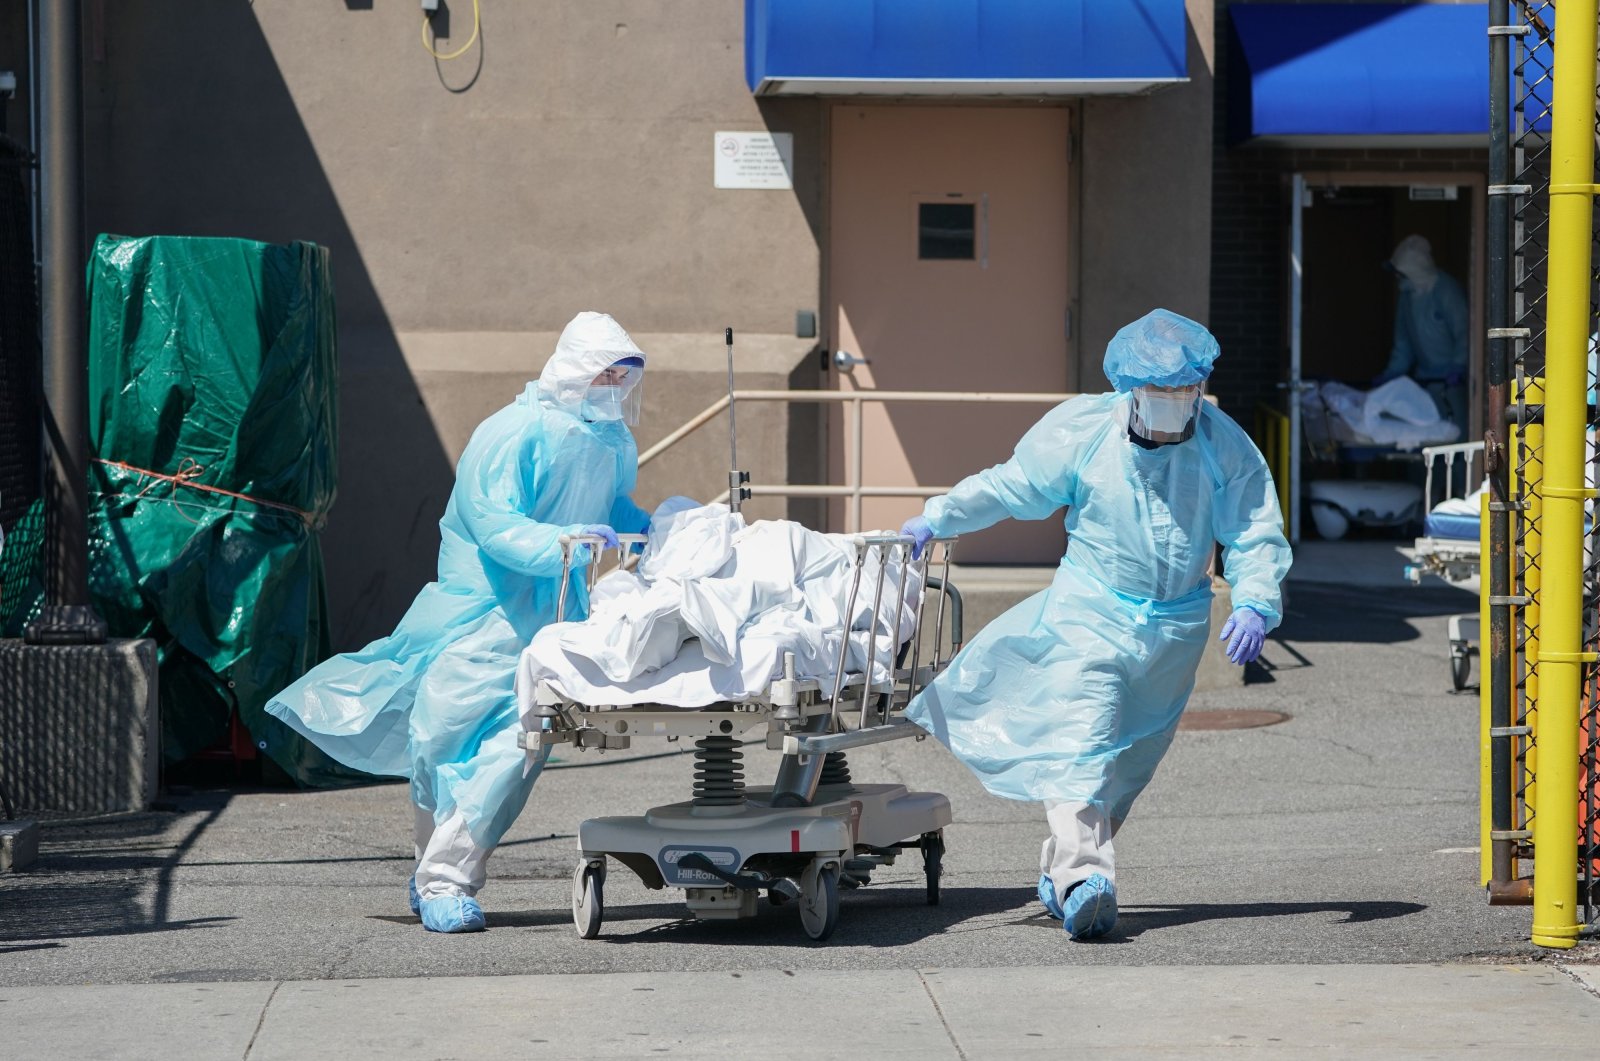 Bodies are moved to a refrigeration truck serving as a temporary morgue at Wyckoff Hospital in the Borough of Brooklyn, New York City, April 6, 2020. (AFP Photo)